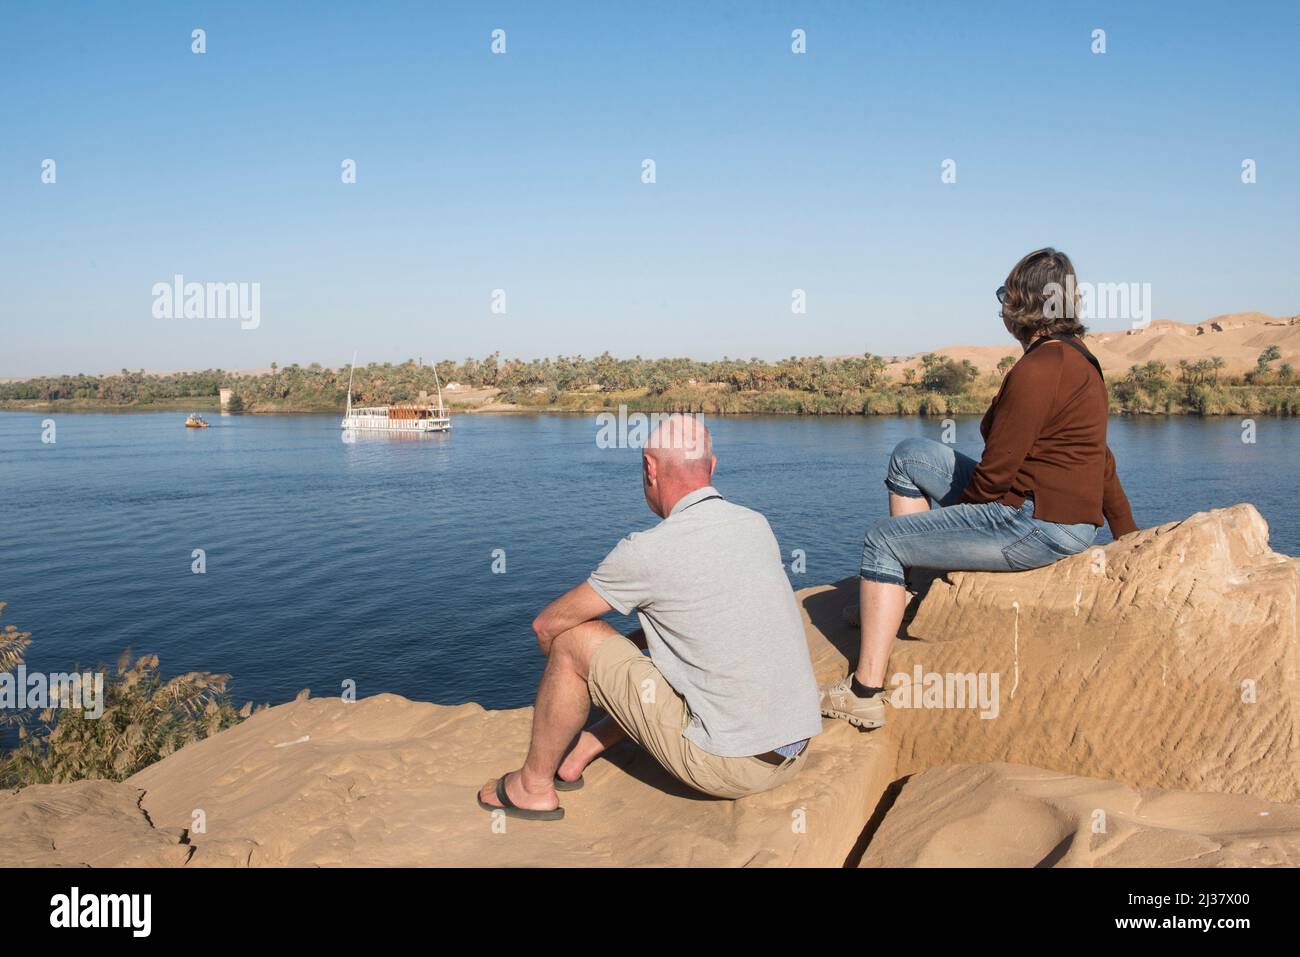 Couple observing the Nile from the Archaeological site of Gebel Silsileh where is the largest sandstone quarry of ancient Egypt: Kheny, on the west Stock Photo